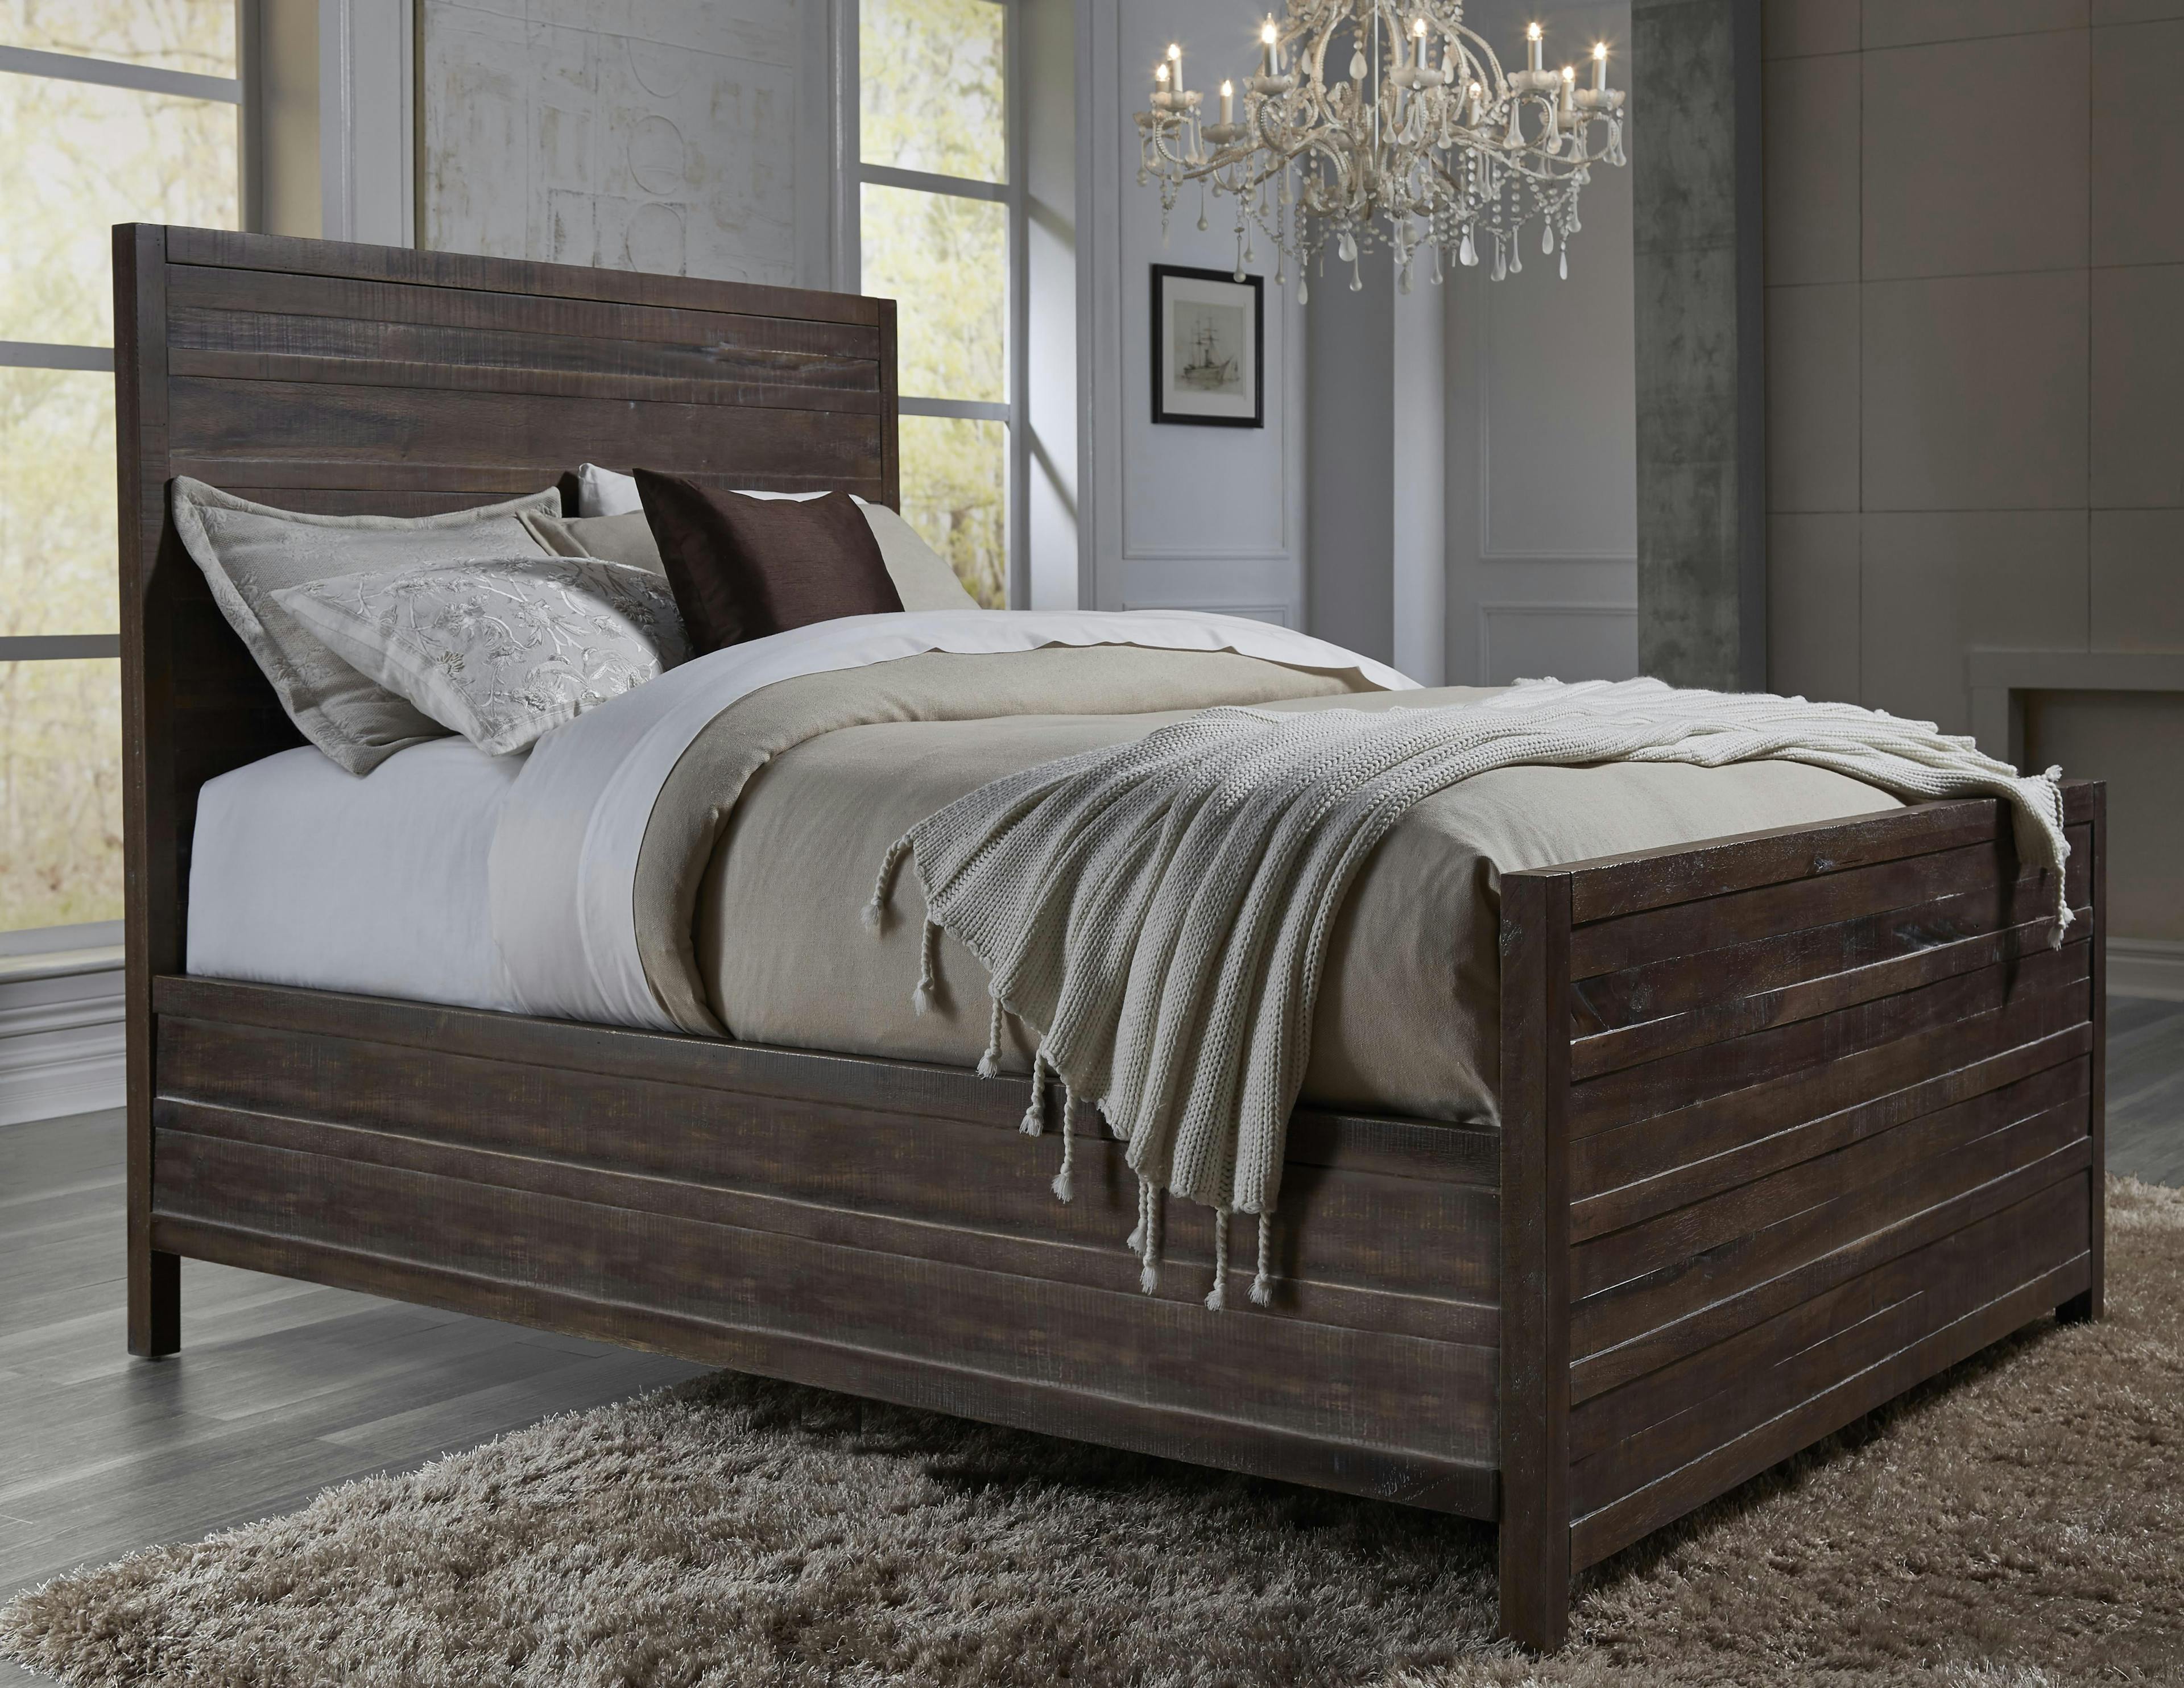 Townsend Java Queen Solid Wood Bed with Storage and Headboard